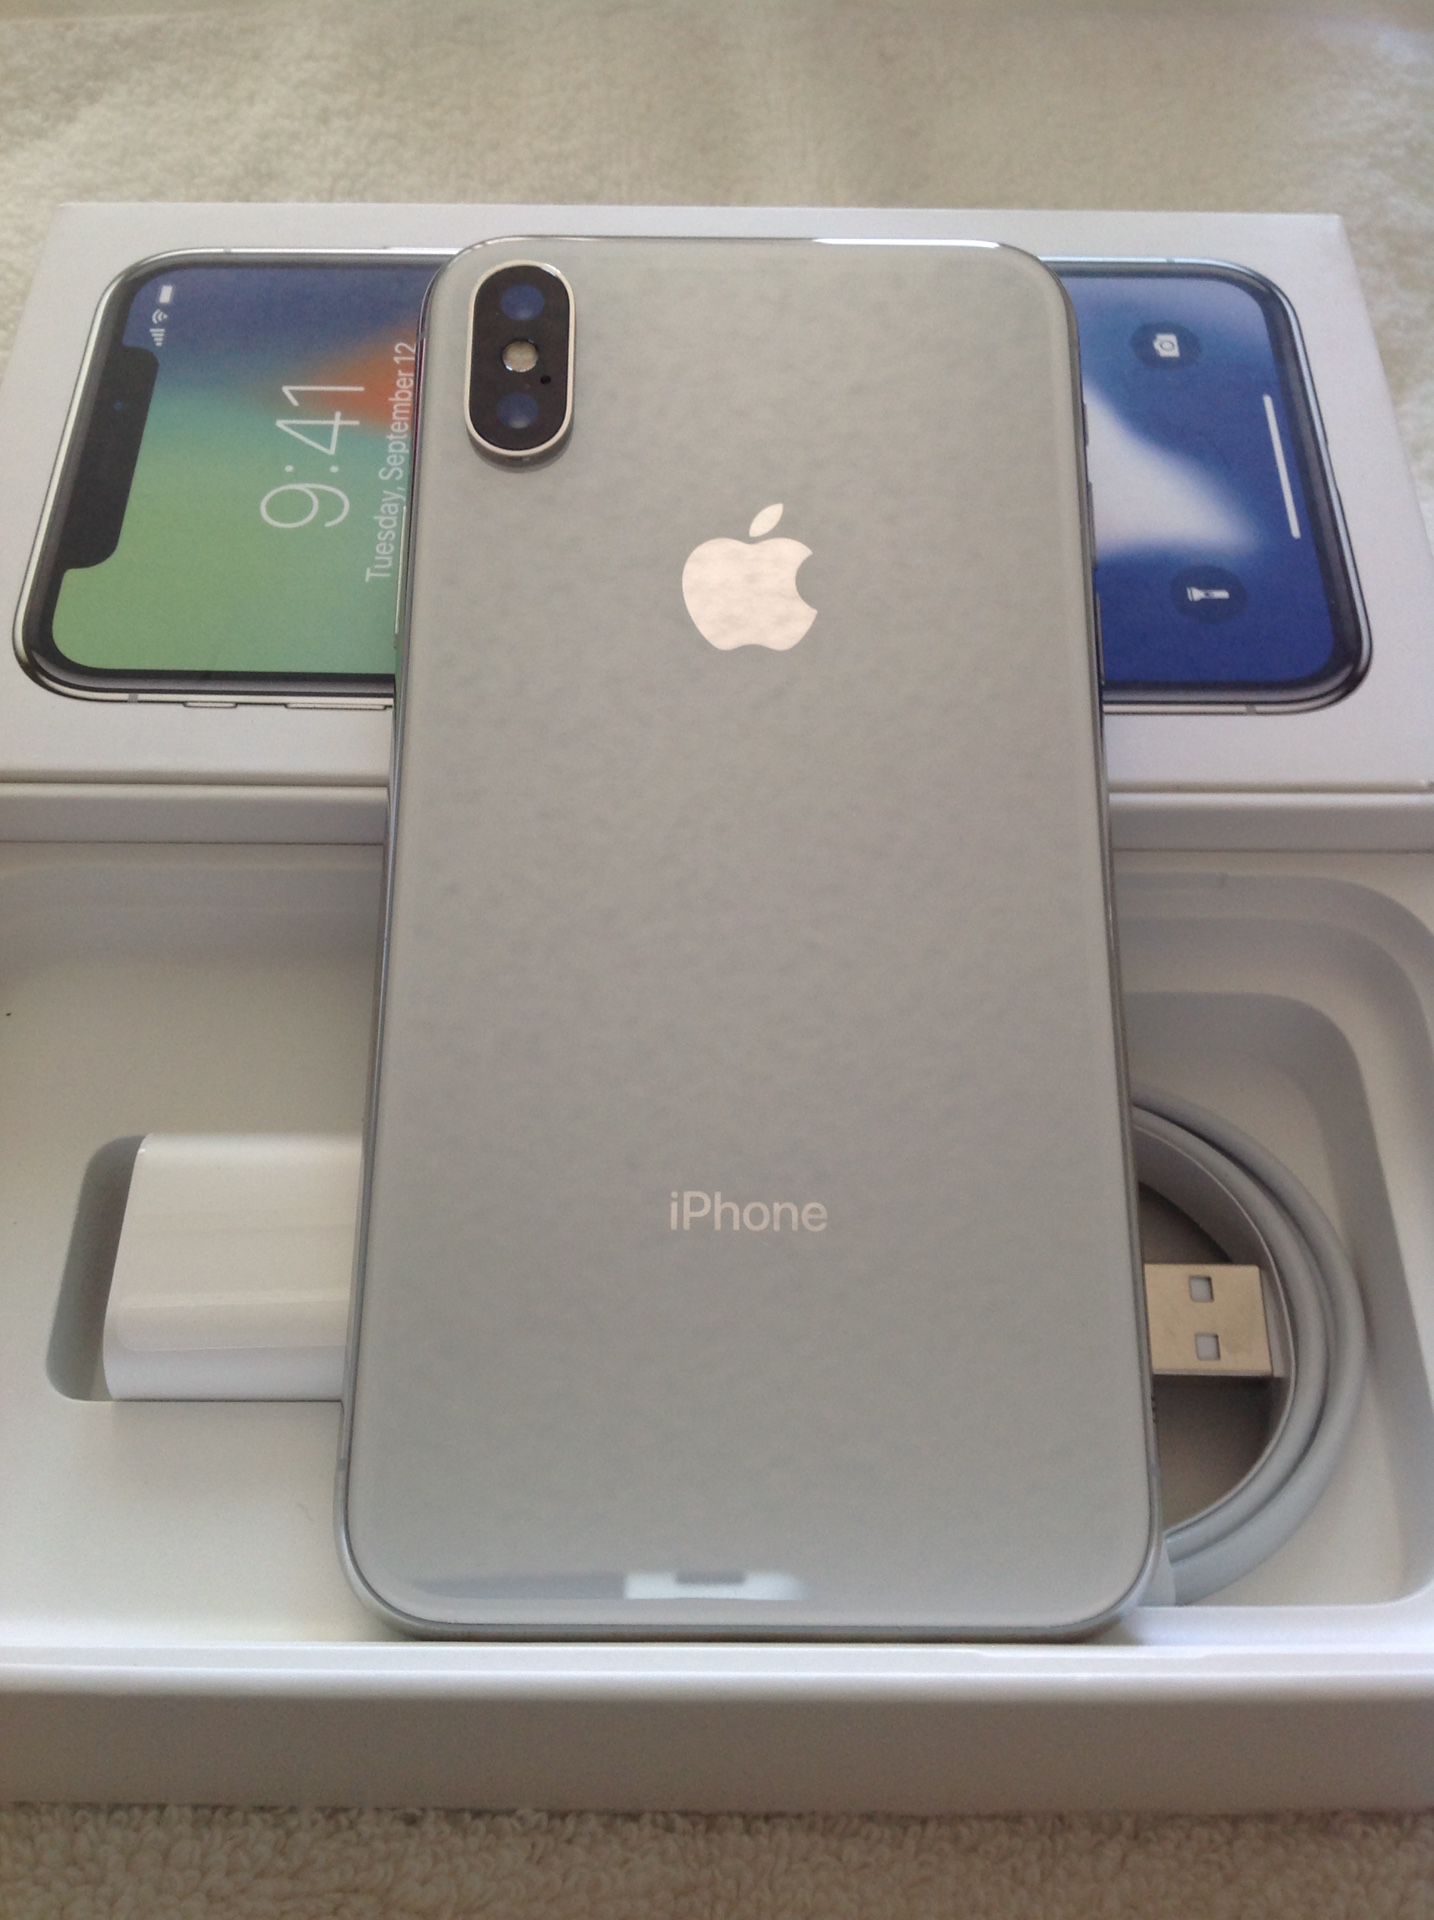 Apple iPhone X 64GB (SPRINT) BOOST MOBILE $400 FIRM